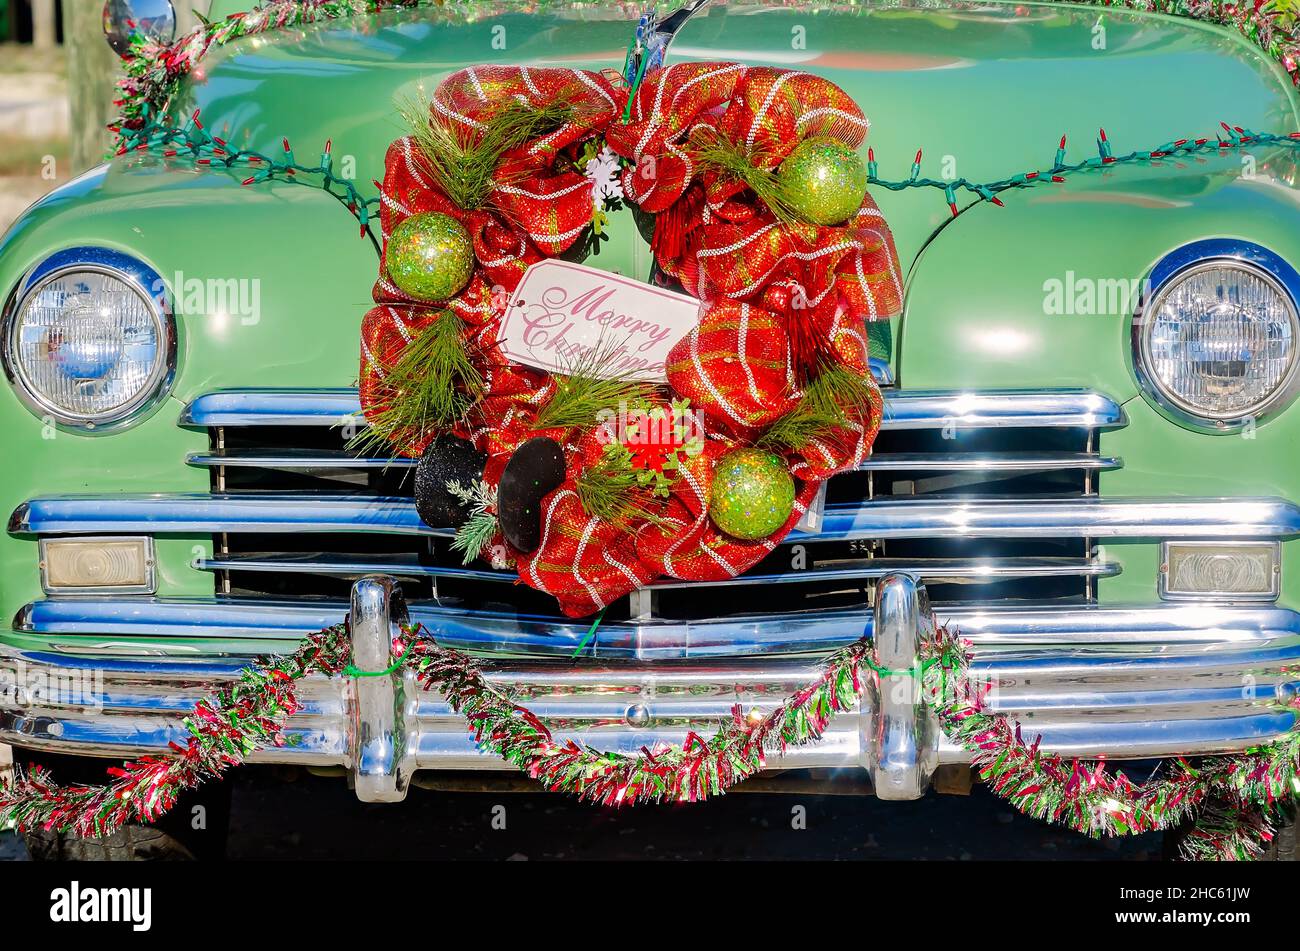 A Christmas wreath hangs on the grille of a restored 1949 Plymouth Special De Luxe automobile, Dec. 24, 2021, in Dauphin Island, Alabama. (Photo by Ca Stock Photo